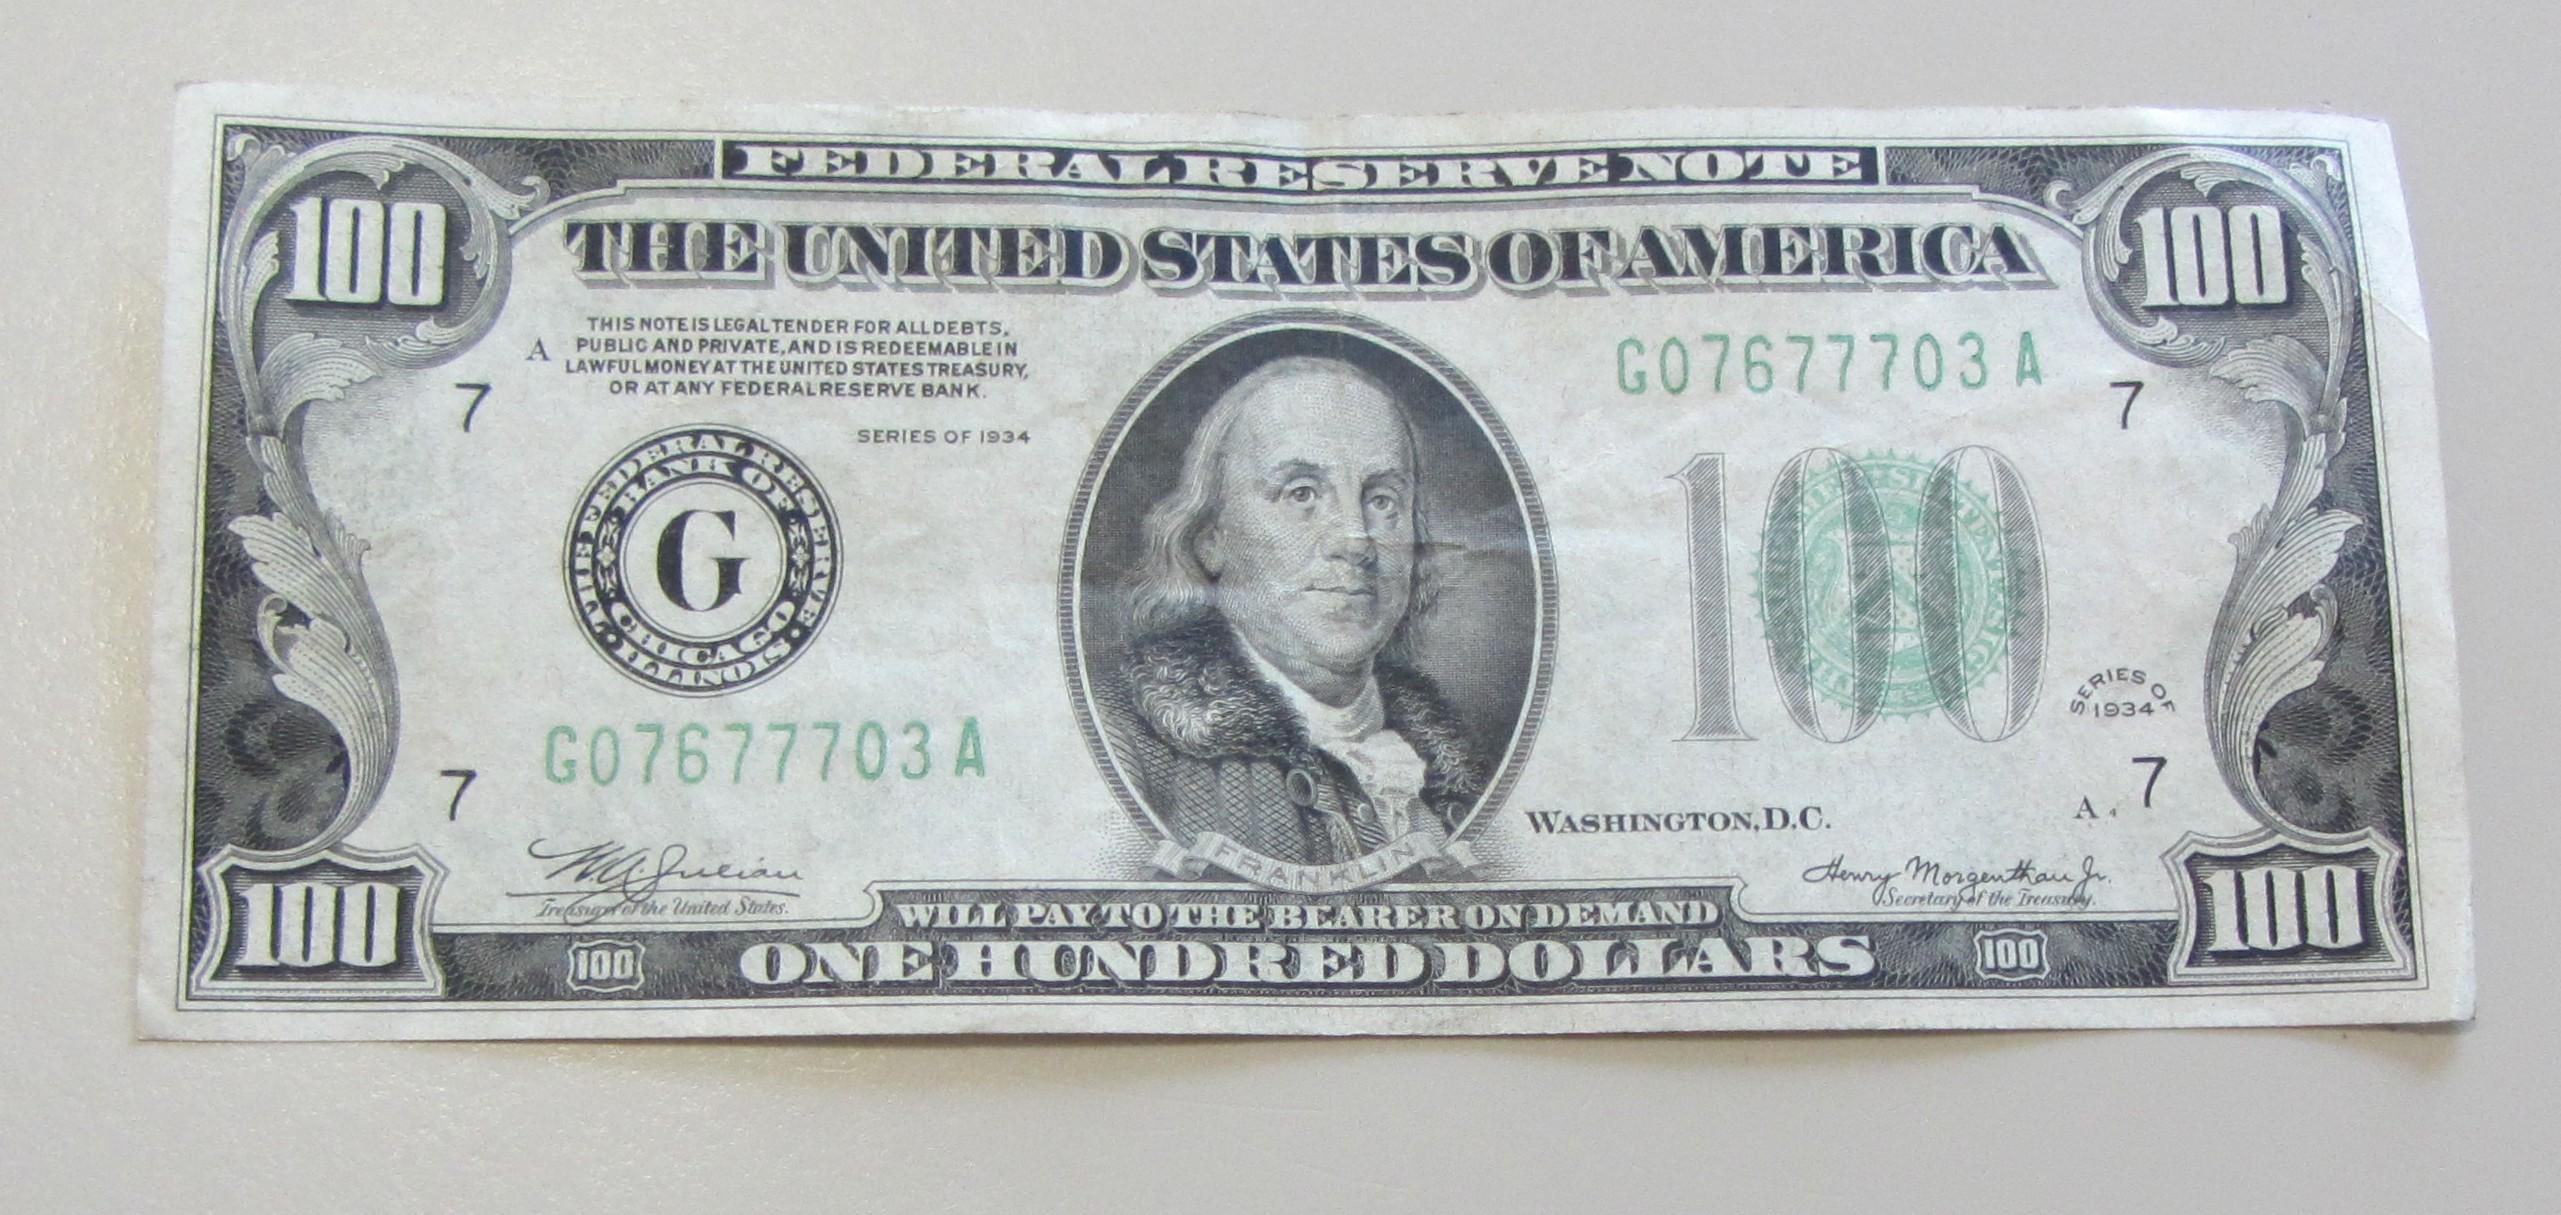 $100 FEDERAL RESERVE NOTE 1934 7703